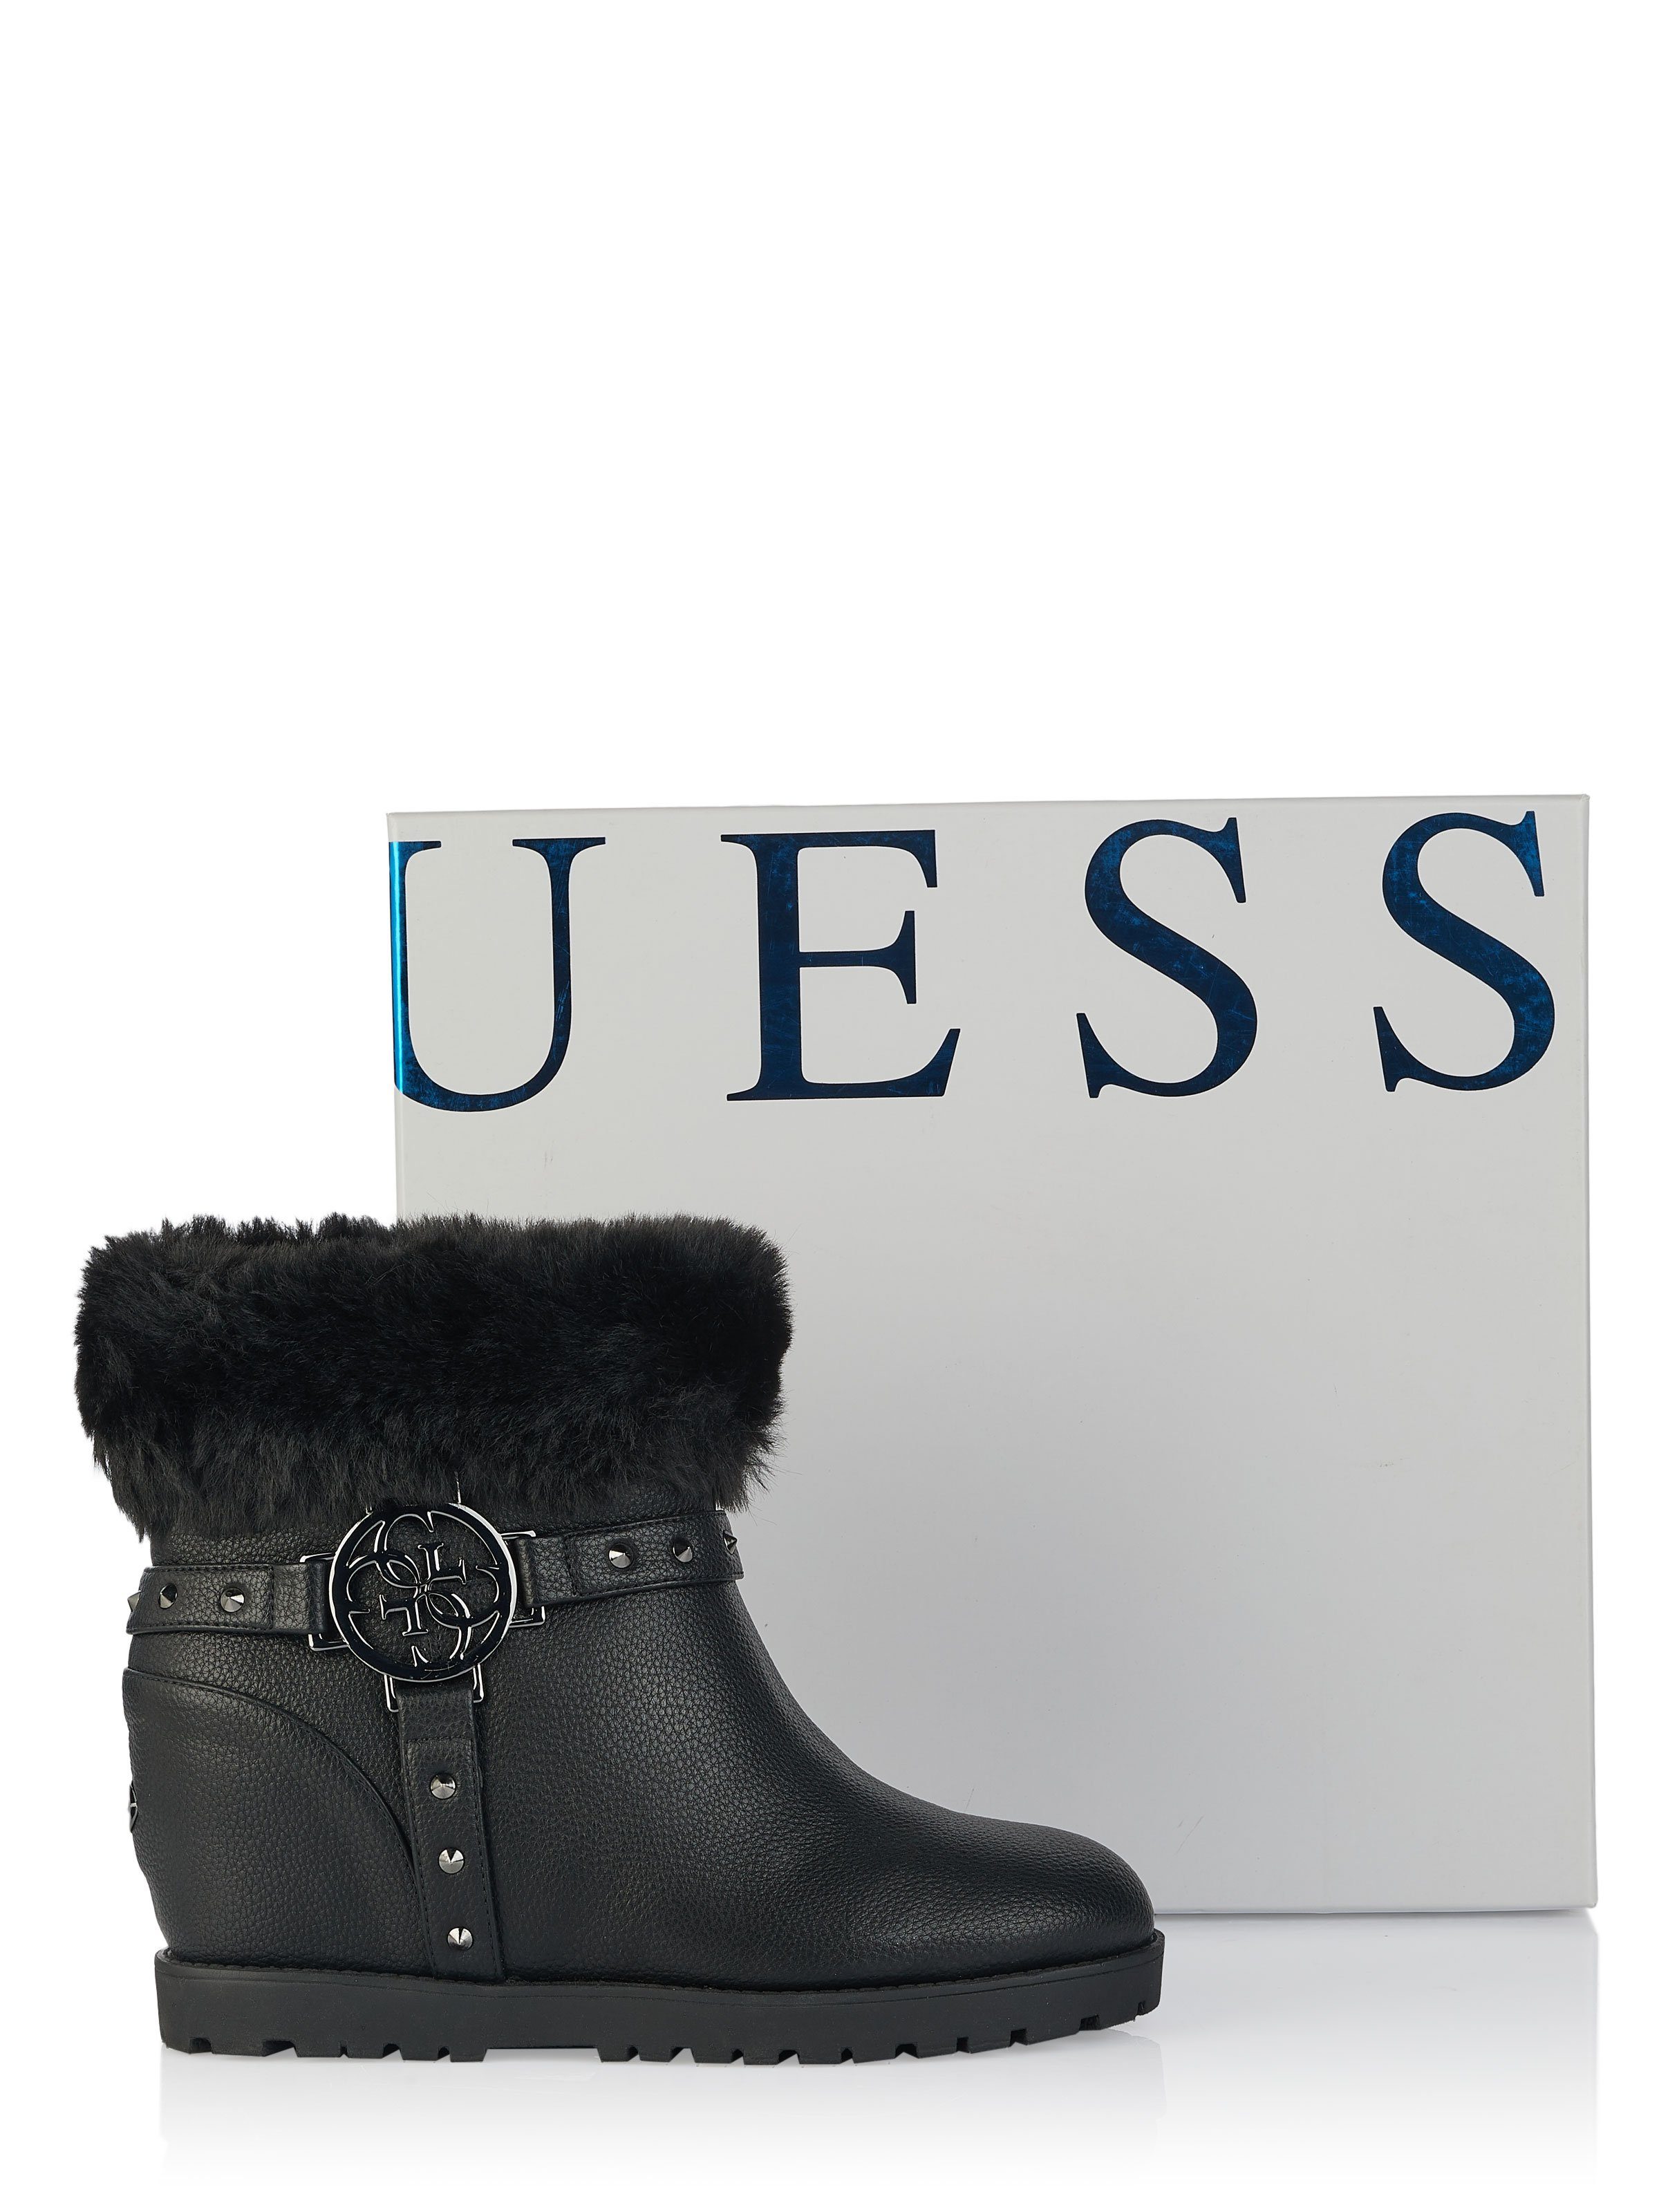 Ankleboots Guess Stiefel GUESS